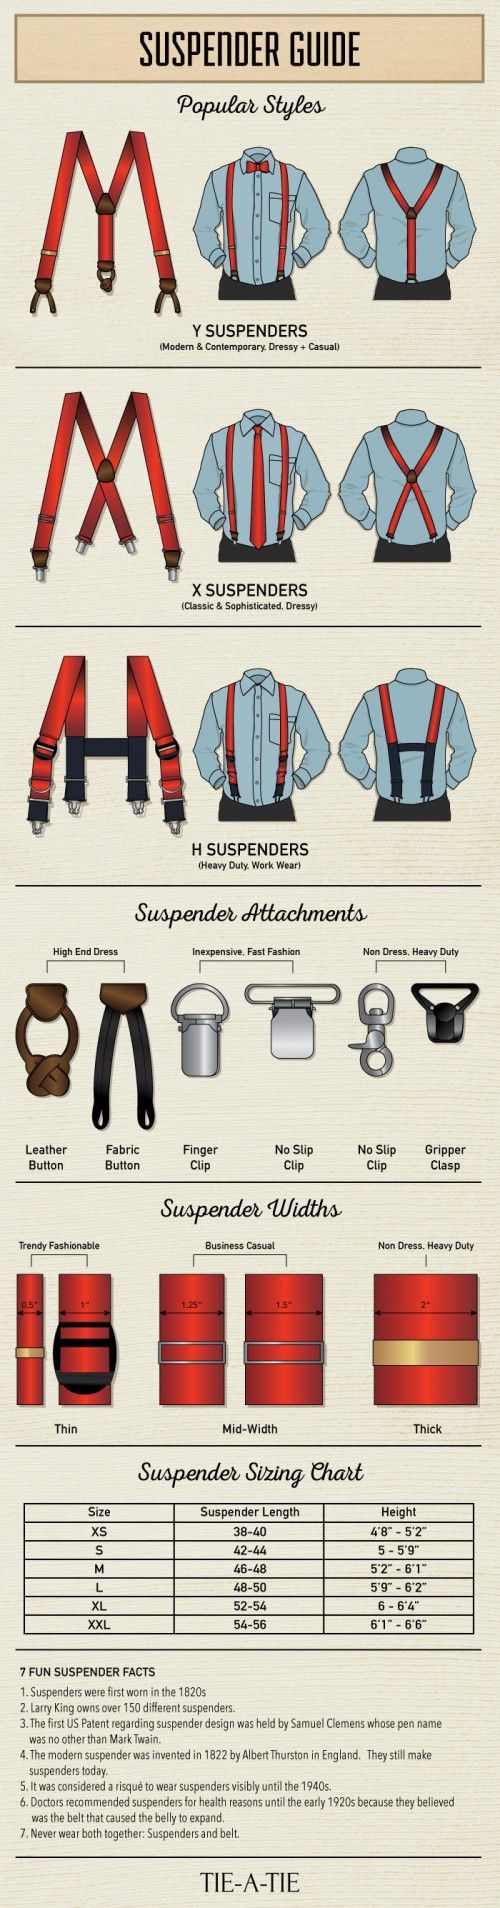 How to properly wear suspenders